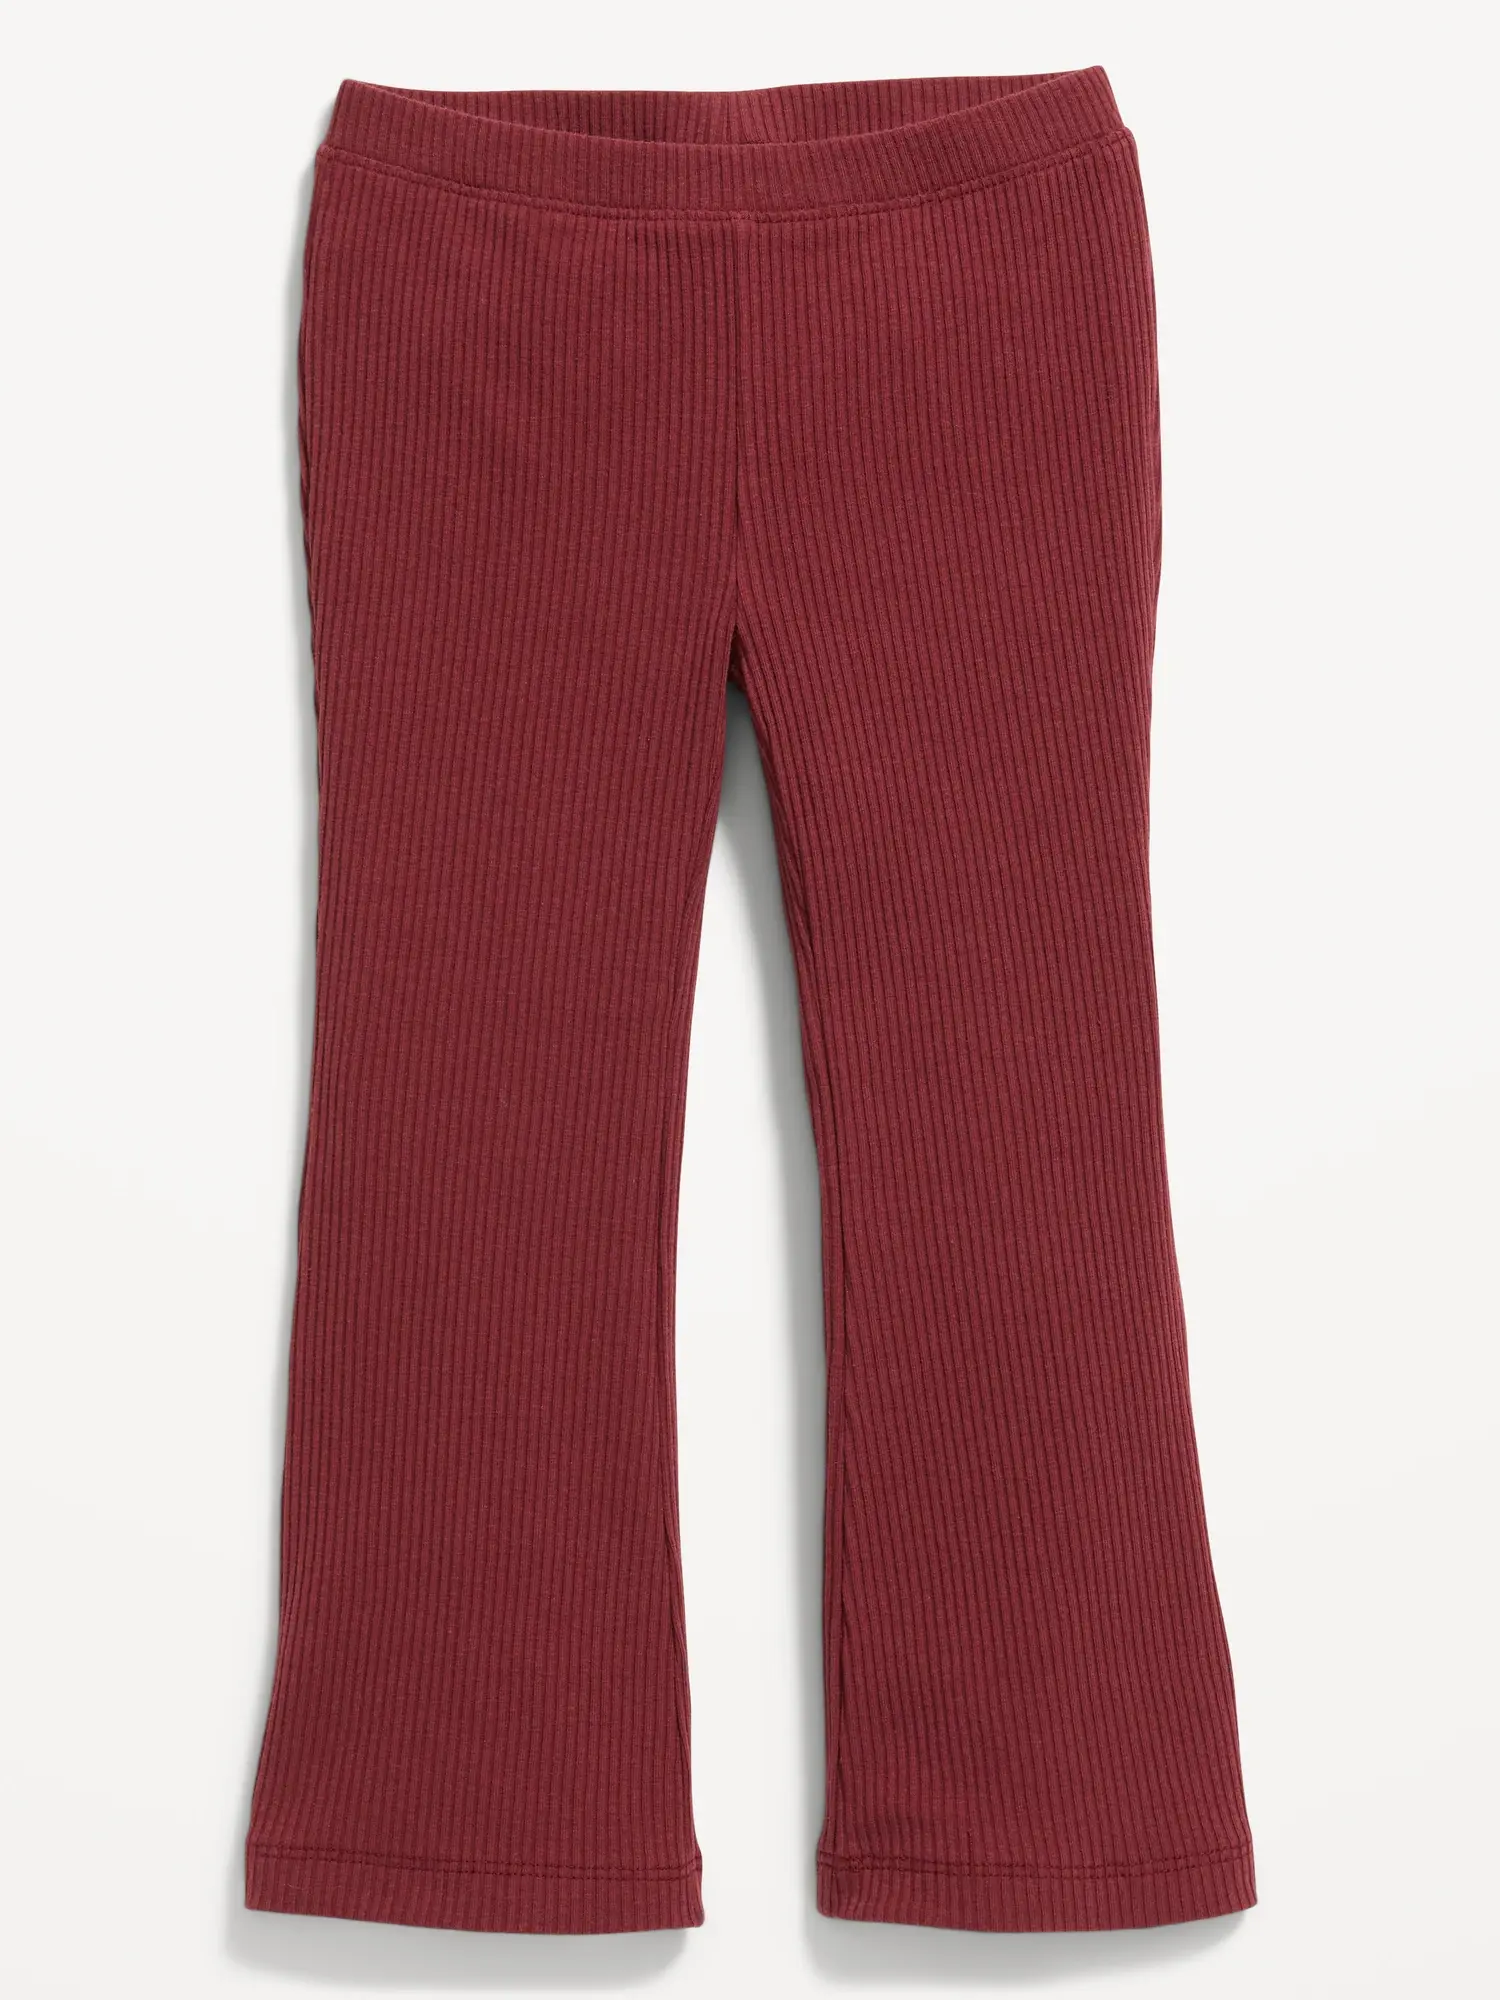 Old Navy Rib-Knit Flare Pants for Toddler Girls multi - 506334003